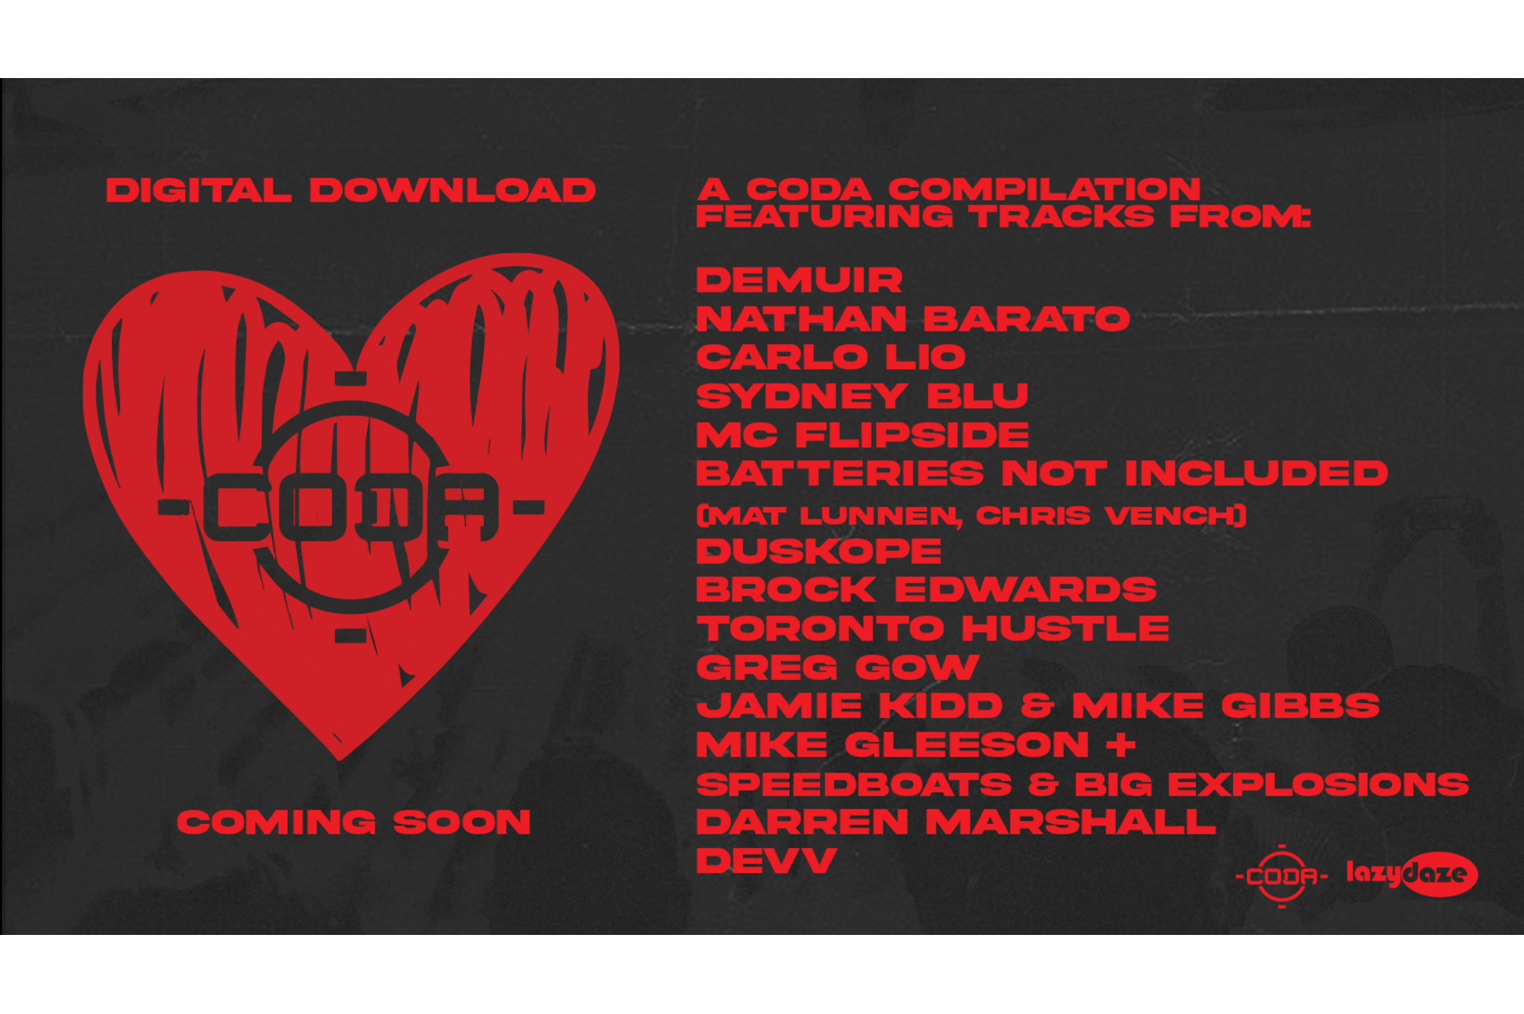 for the damaged coda compilation